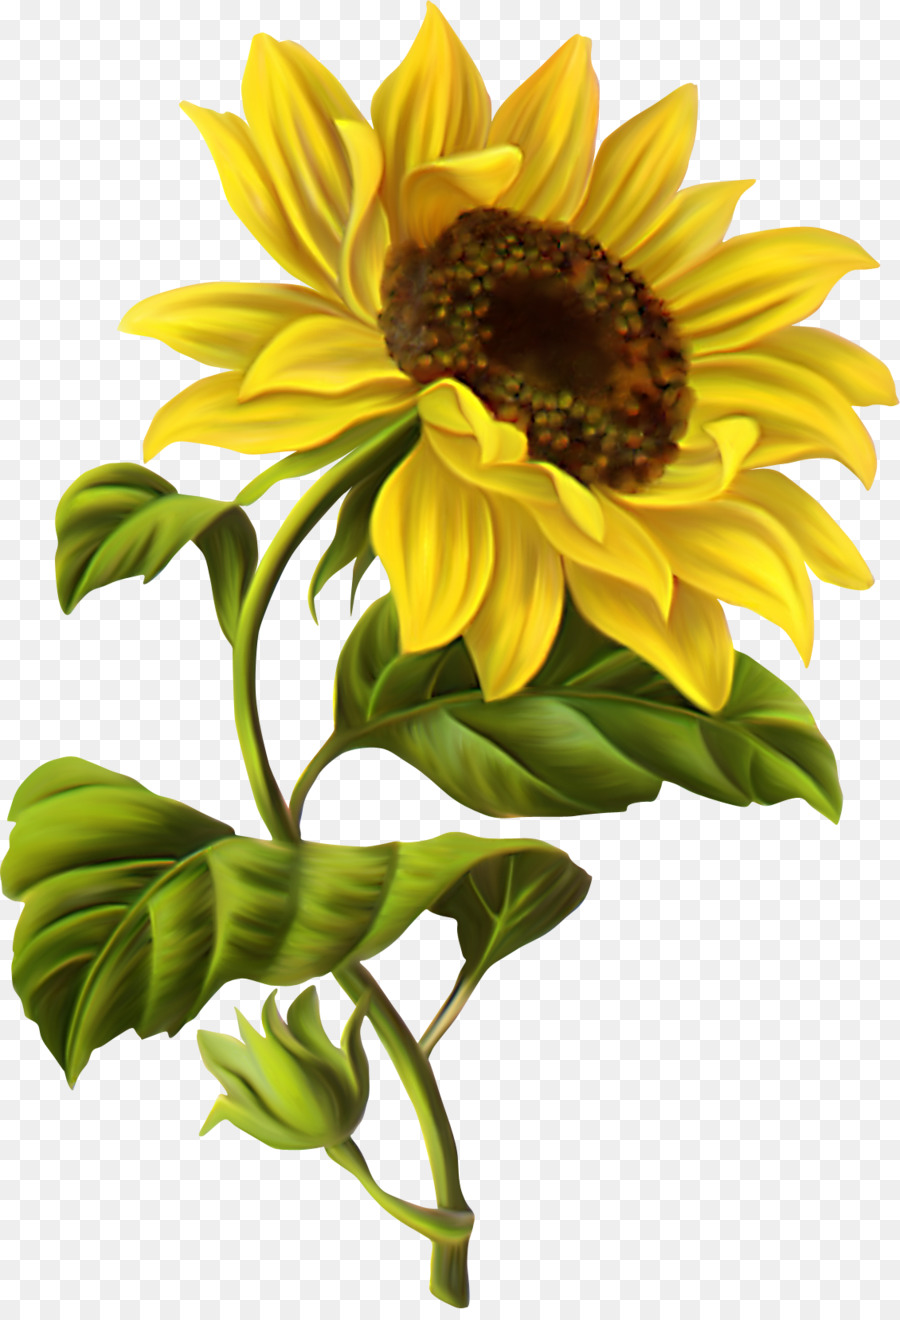 Common sunflower Drawing Botanical illustration Watercolor painting - chamomile png download - 1130*1644 - Free Transparent Common Sunflower png Download.